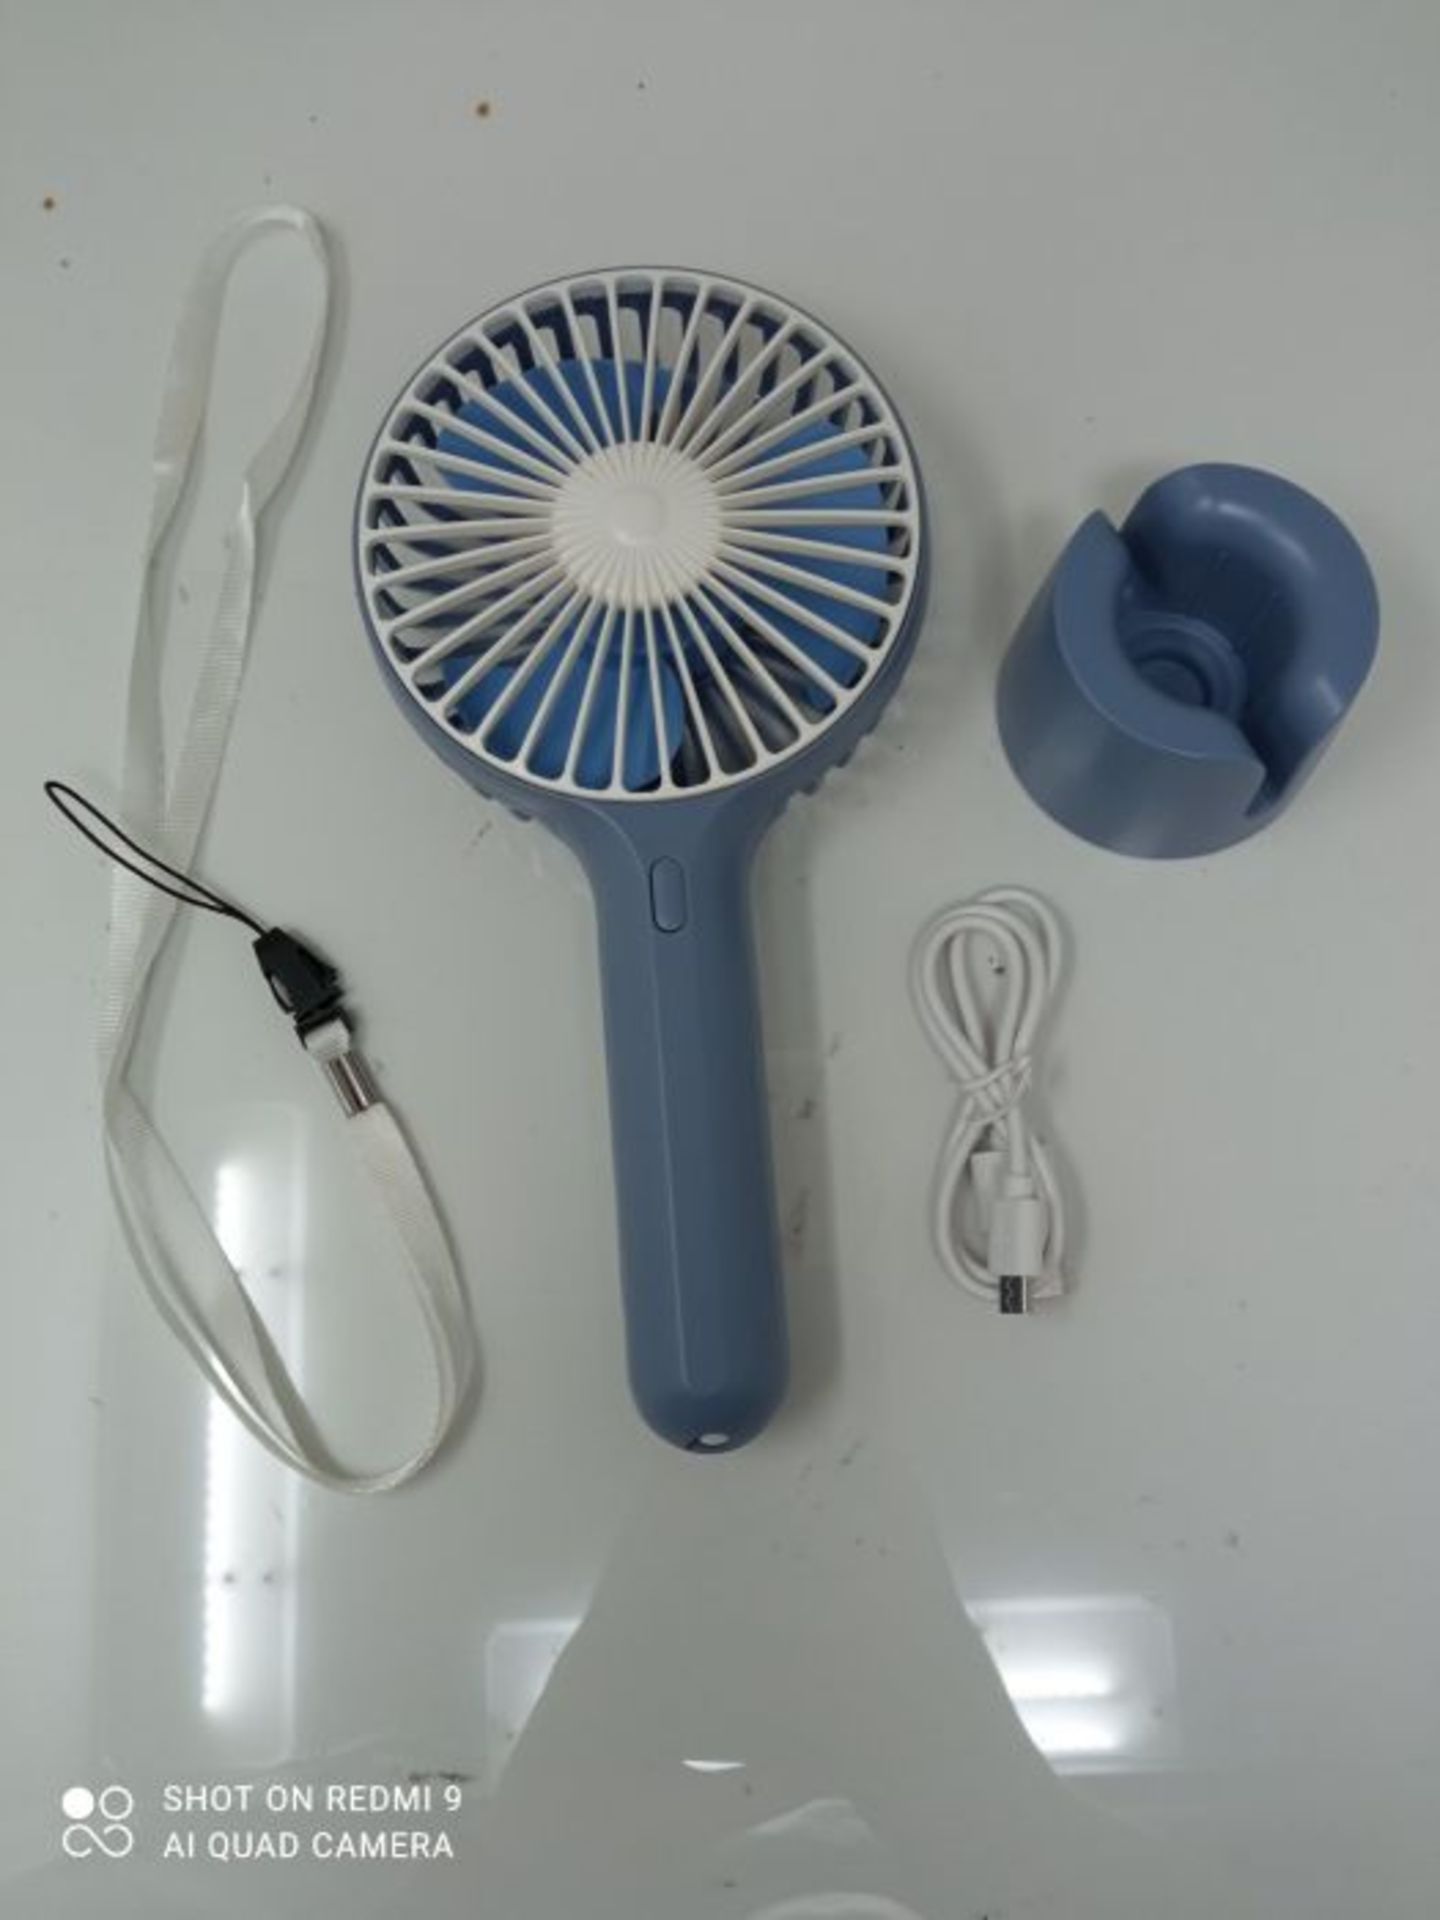 geek cook Fan Cooler,USB handheld small fan mini portable charging new pocket student - Image 3 of 3